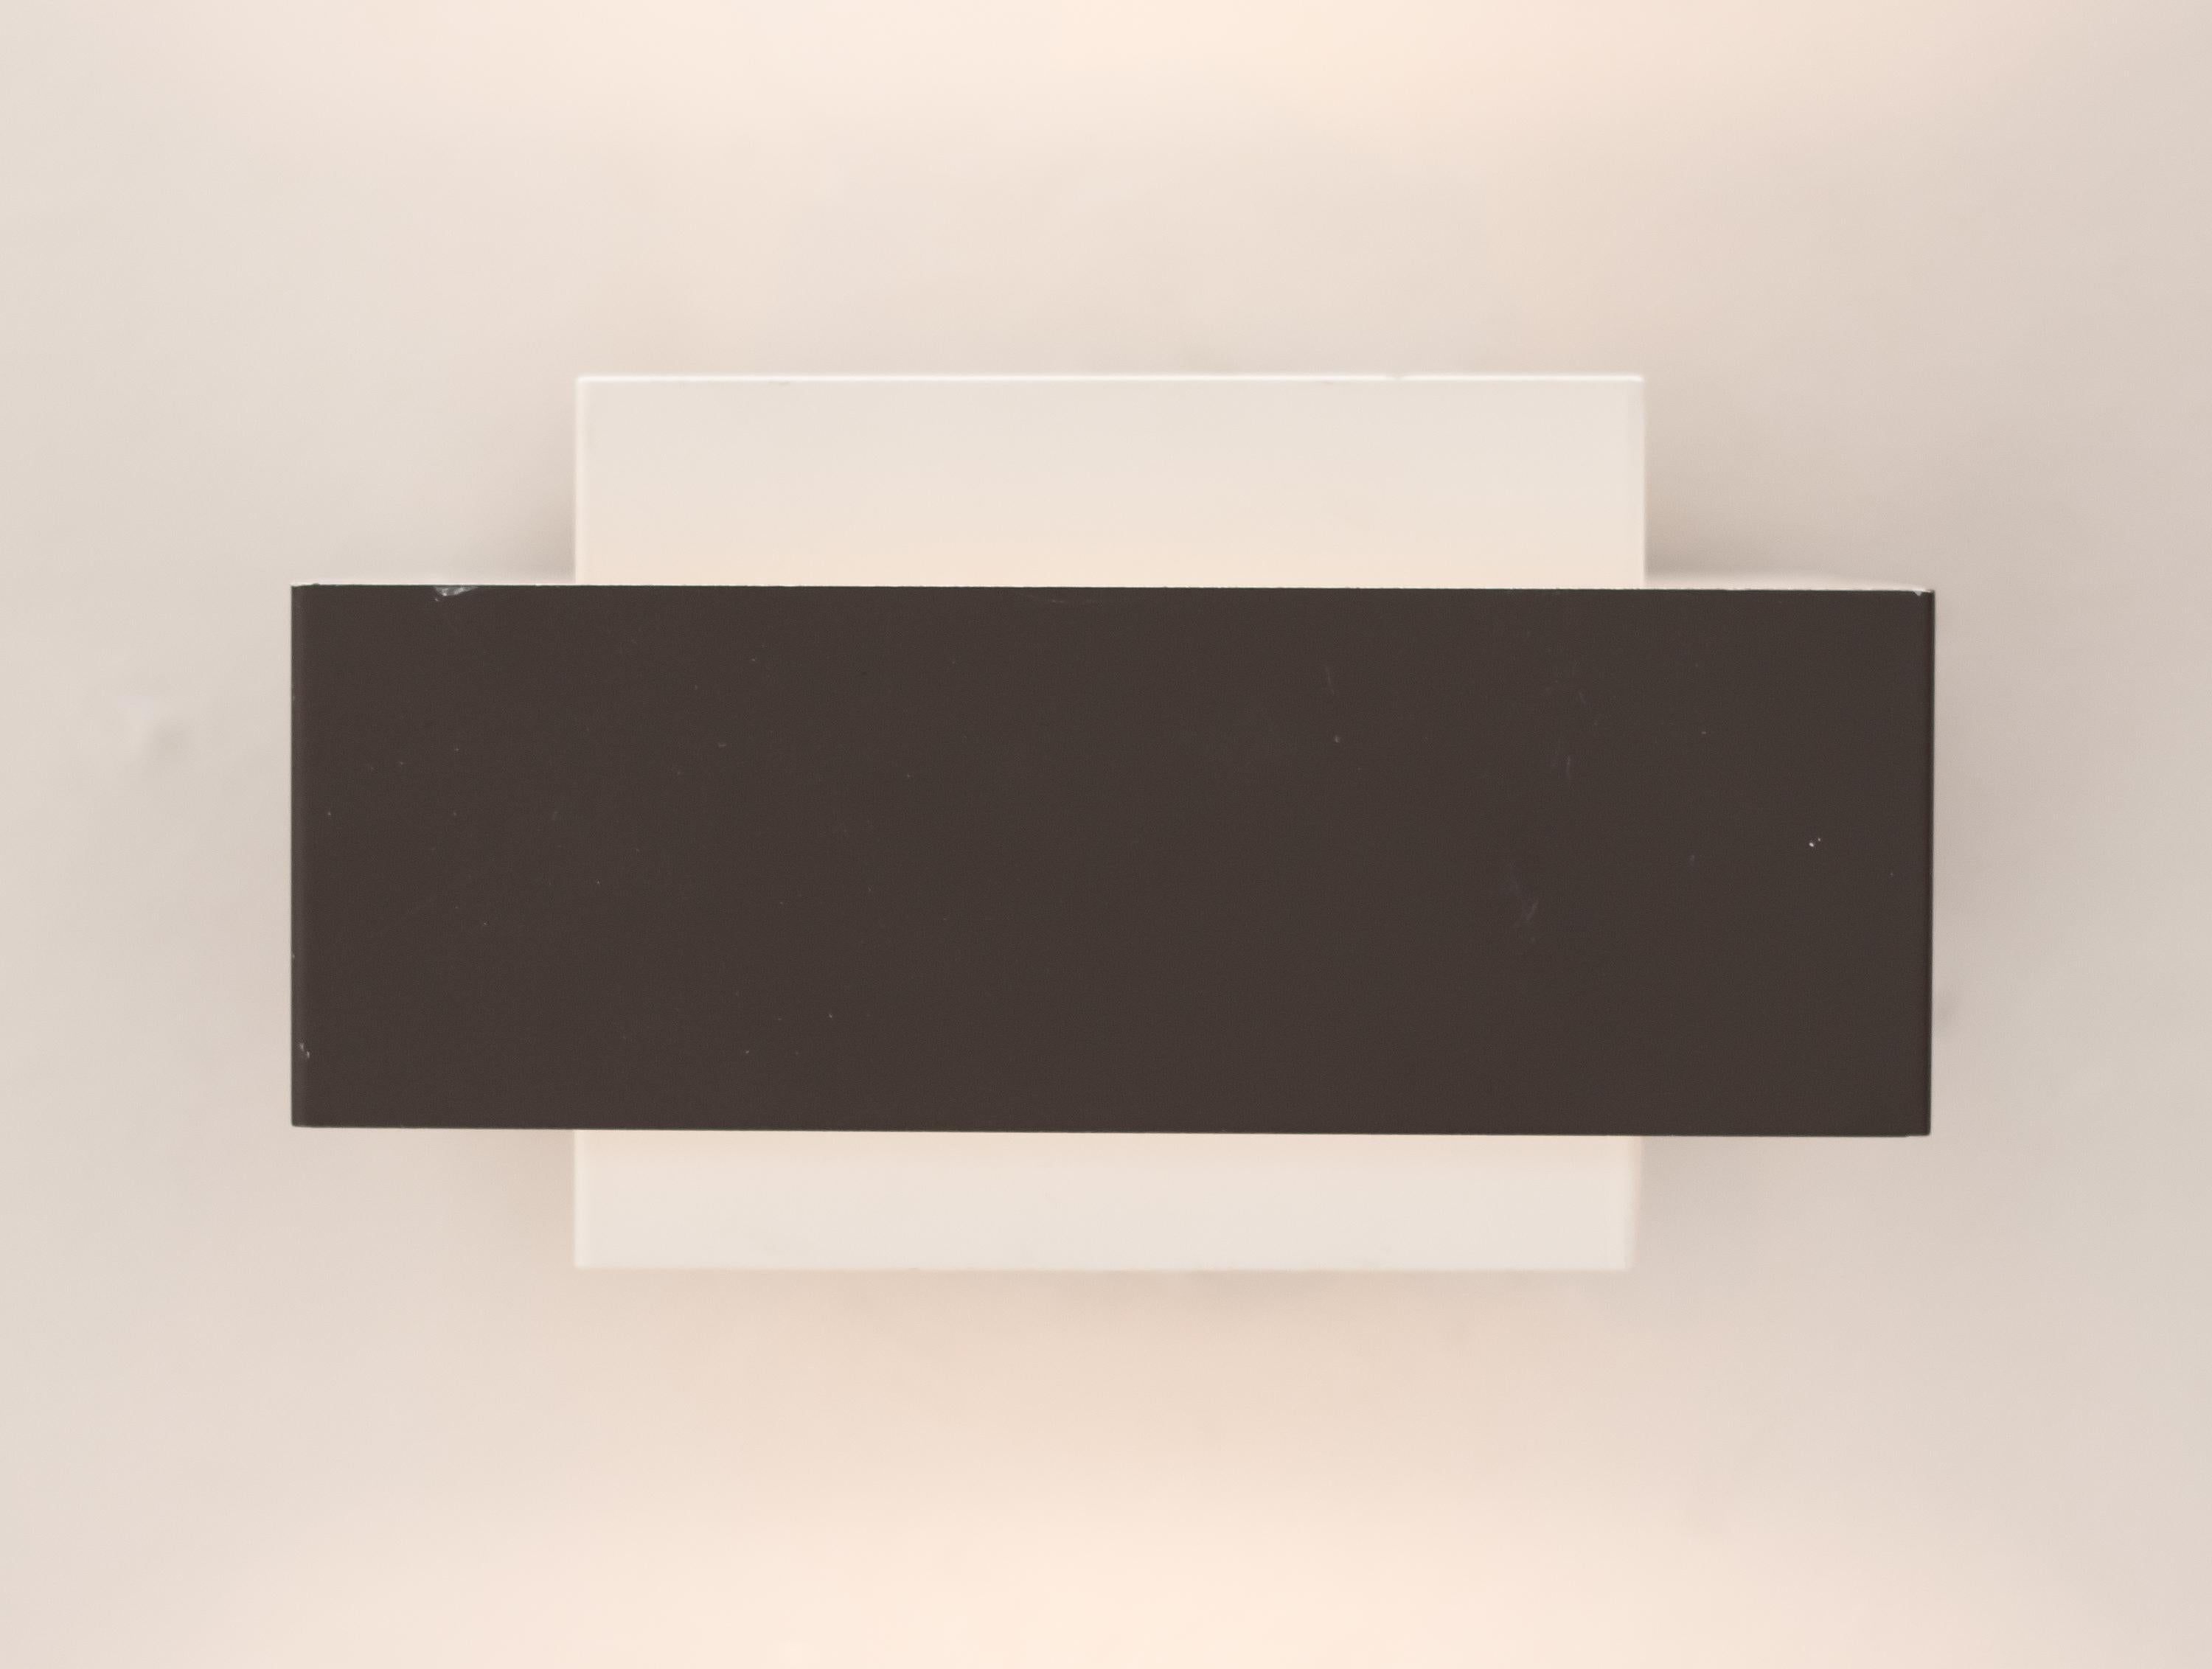 Minimalistic set of wall lights by Philips, made in grey and white enameled sheet metal. 
Marked with label, priced individually.
Free worldwide shipping.